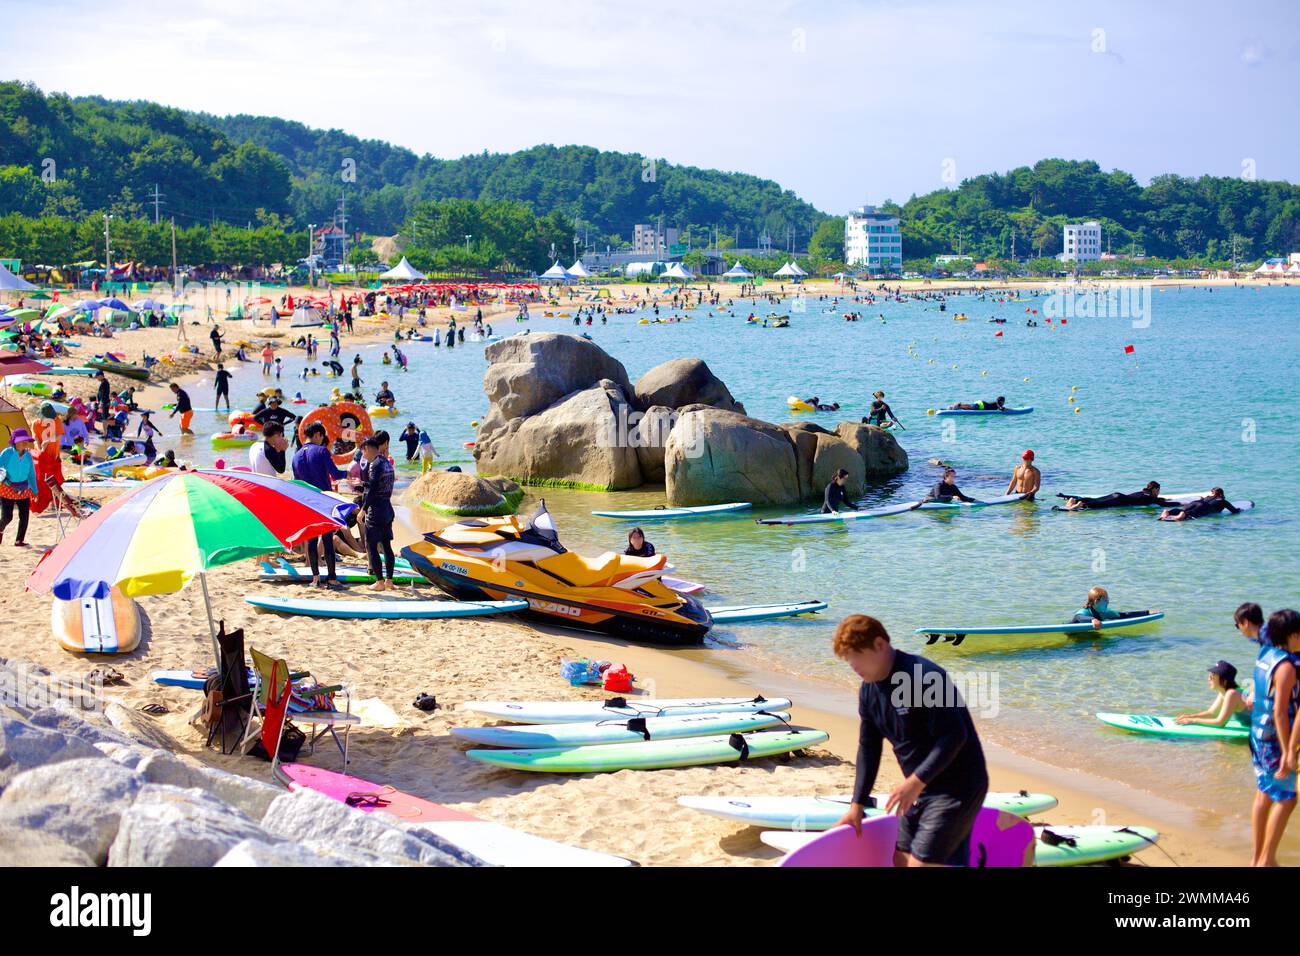 Yangyang County, South Korea - July 30th, 2019: Jukdo Beach buzzes with activity, featuring surfers and surfboards in the shallow, sandy waters among Stock Photo